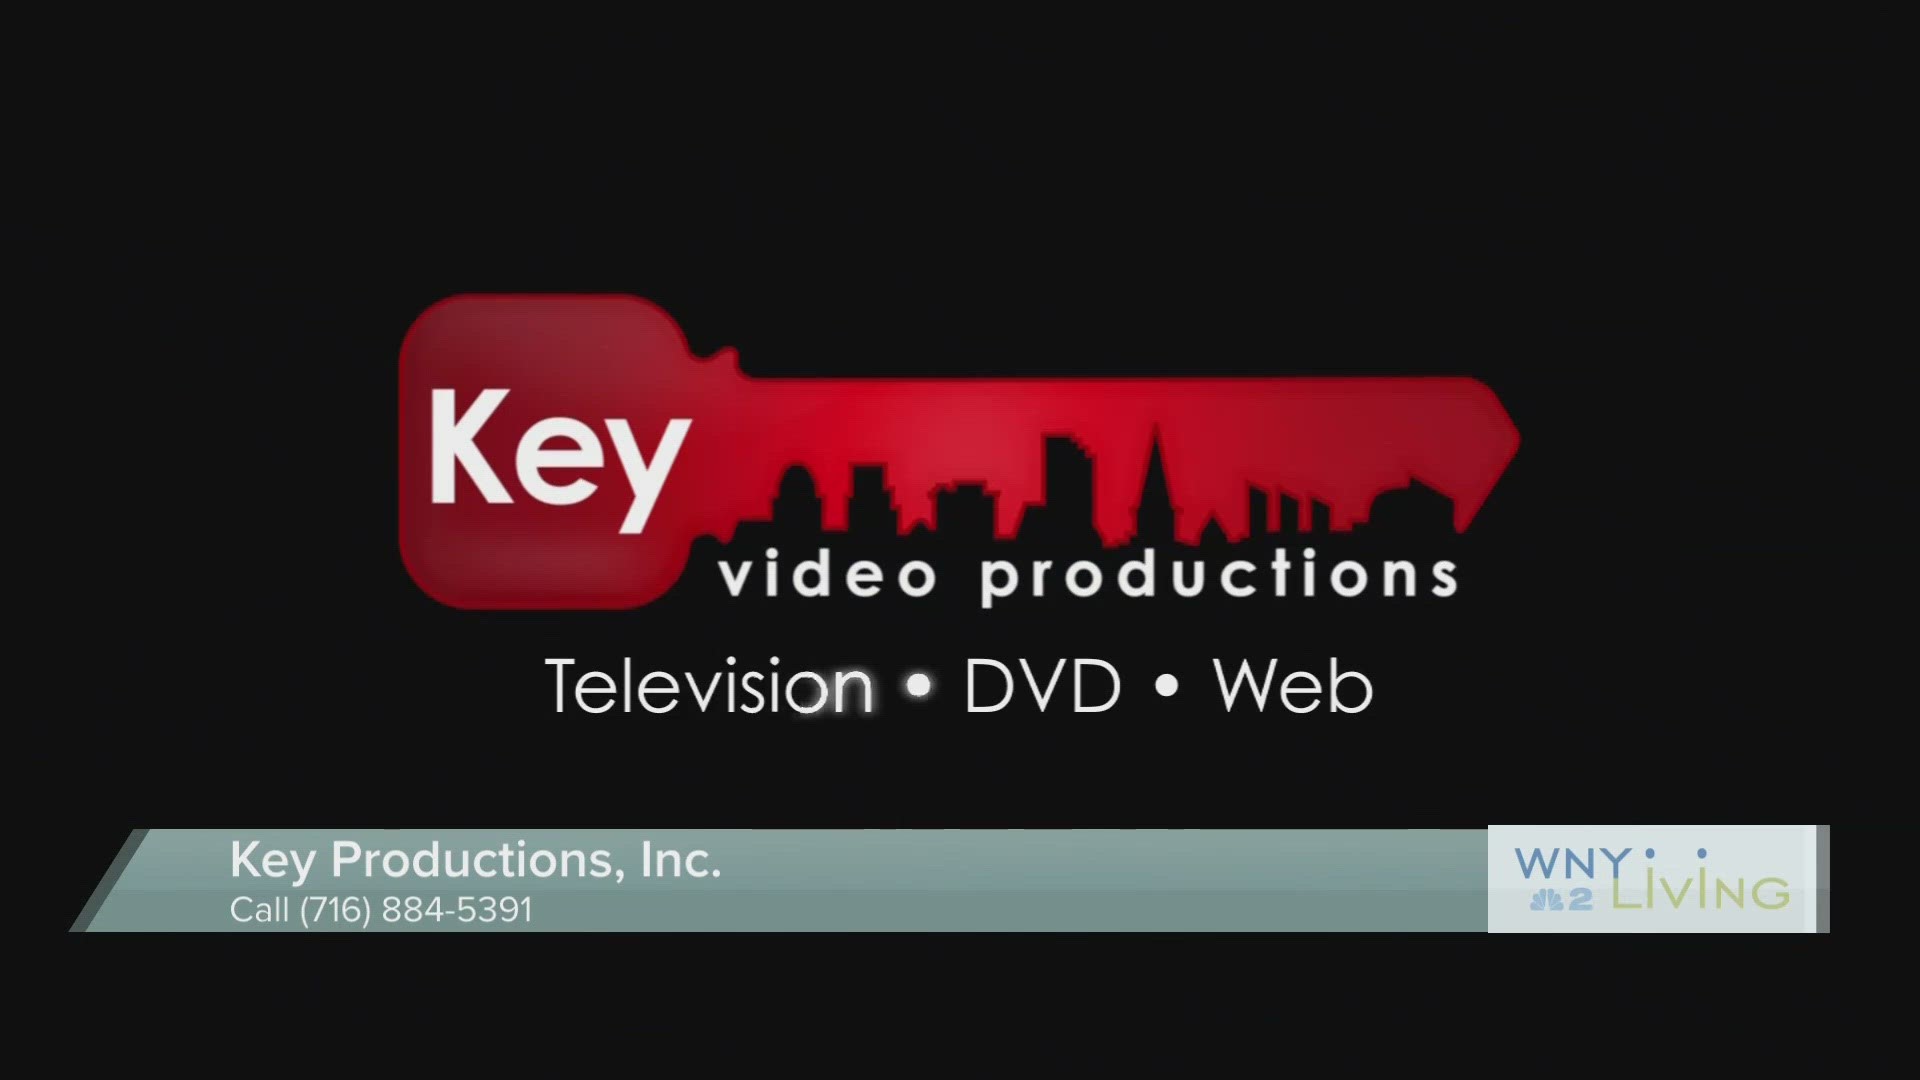 WNY Living- May 13th- Key Productions, INC.  THIS VIDEO IS SPONSORED BY KEY PRODUCTIONS, INC.